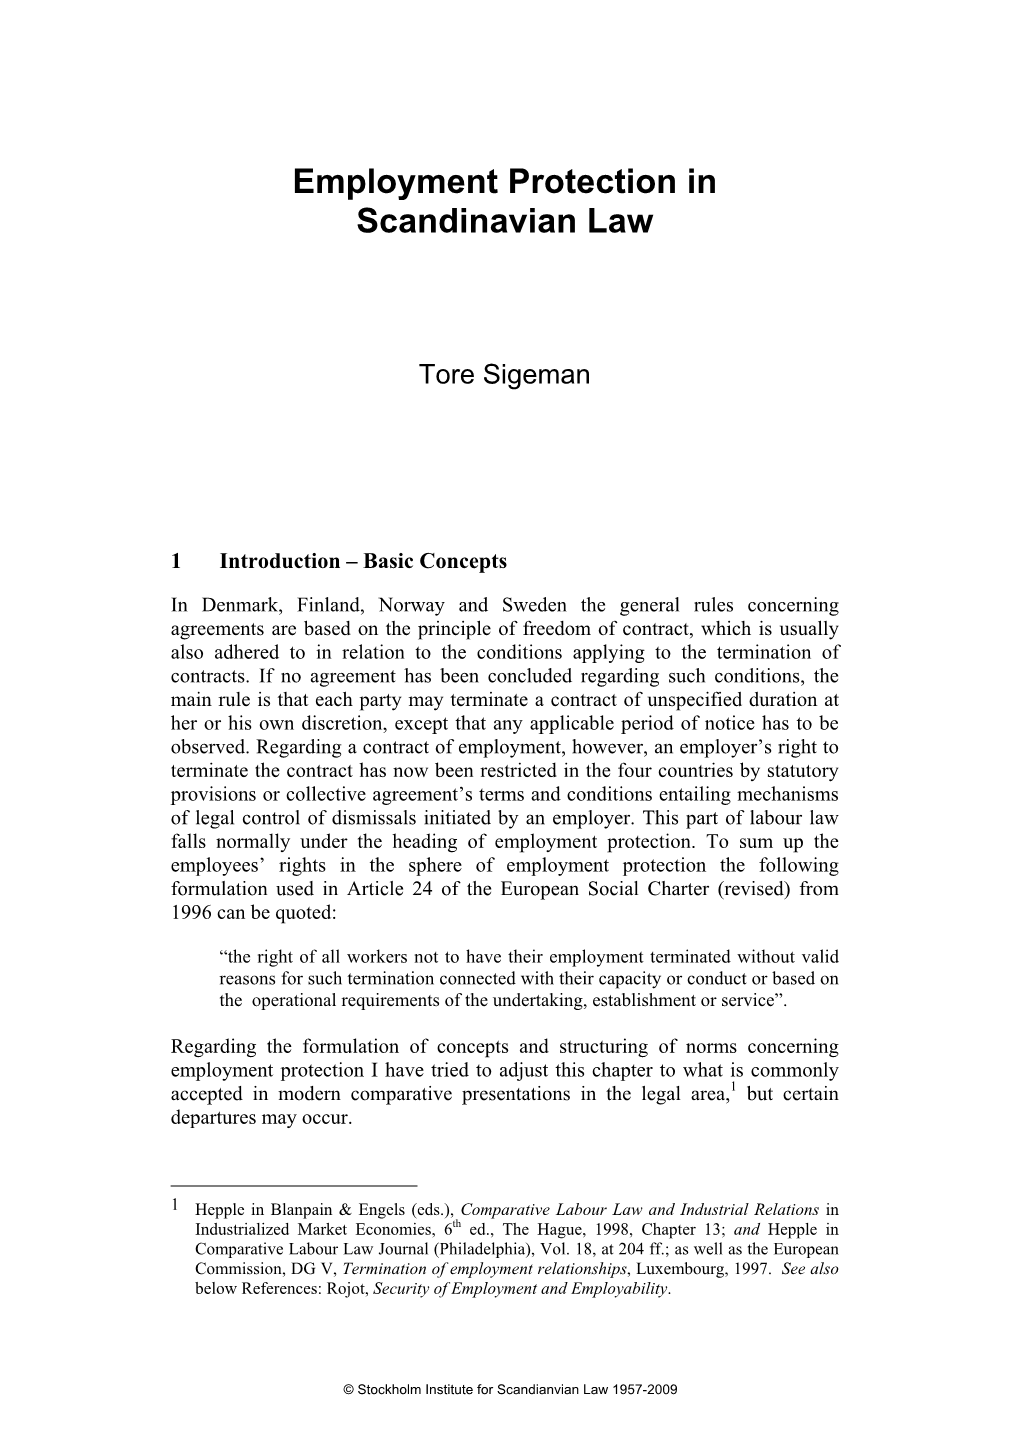 Employment Protection in Scandinavian Law